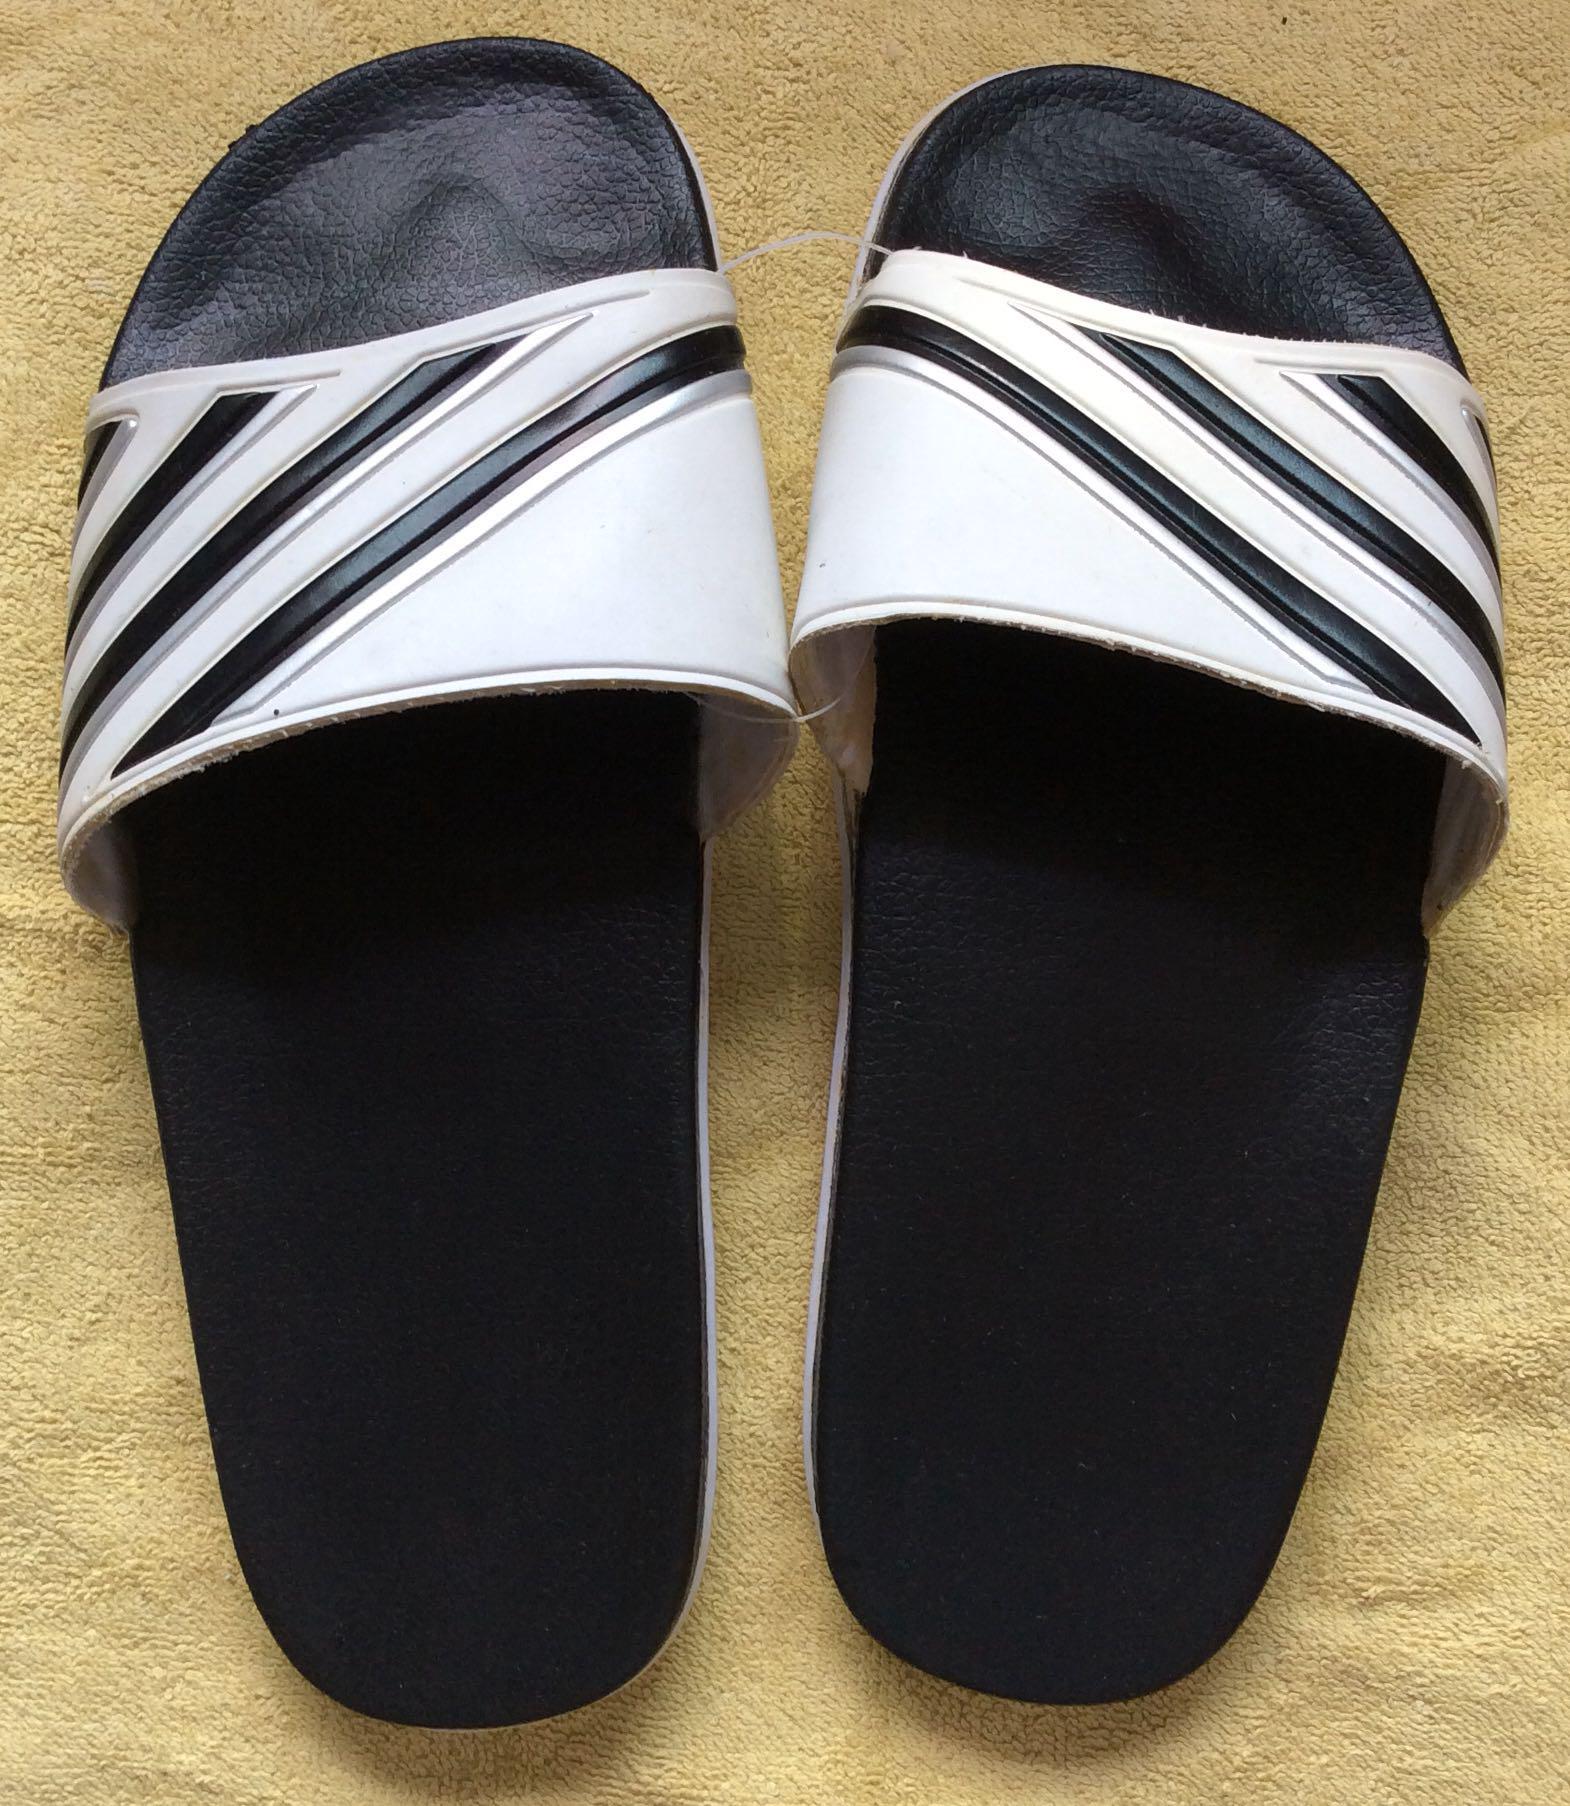 Bathroom Sandals Slippers Shoes size 42 